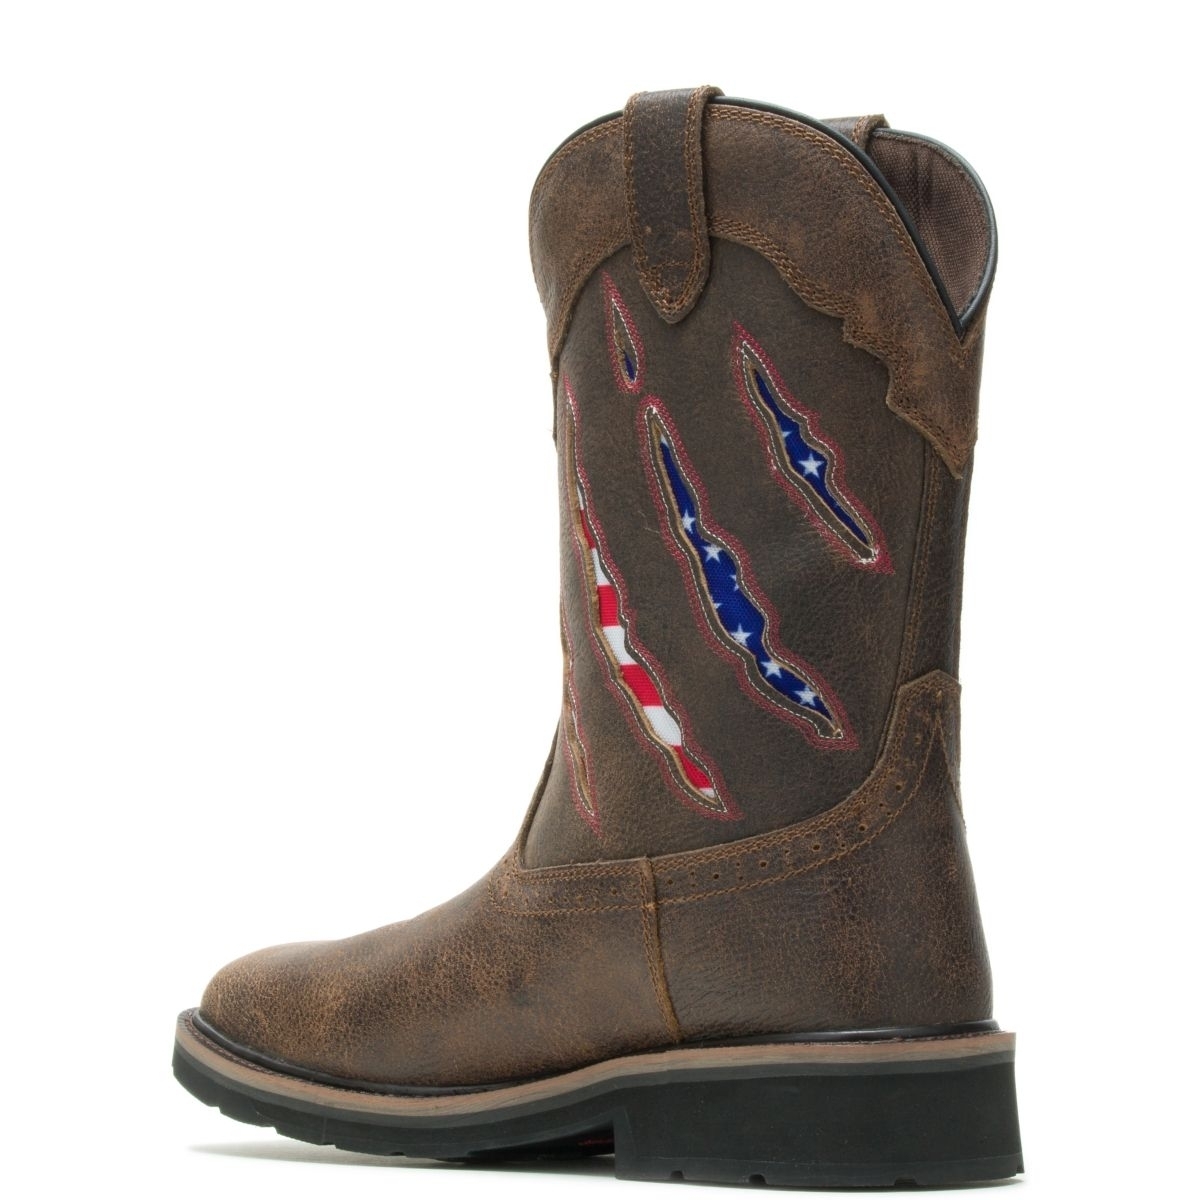 WOLVERINE Men's Rancher Claw Wellington Soft Toe Work Boot Brown/Flag - W200138 Flag/brown - Flag/brown, 10.5 X-Wide